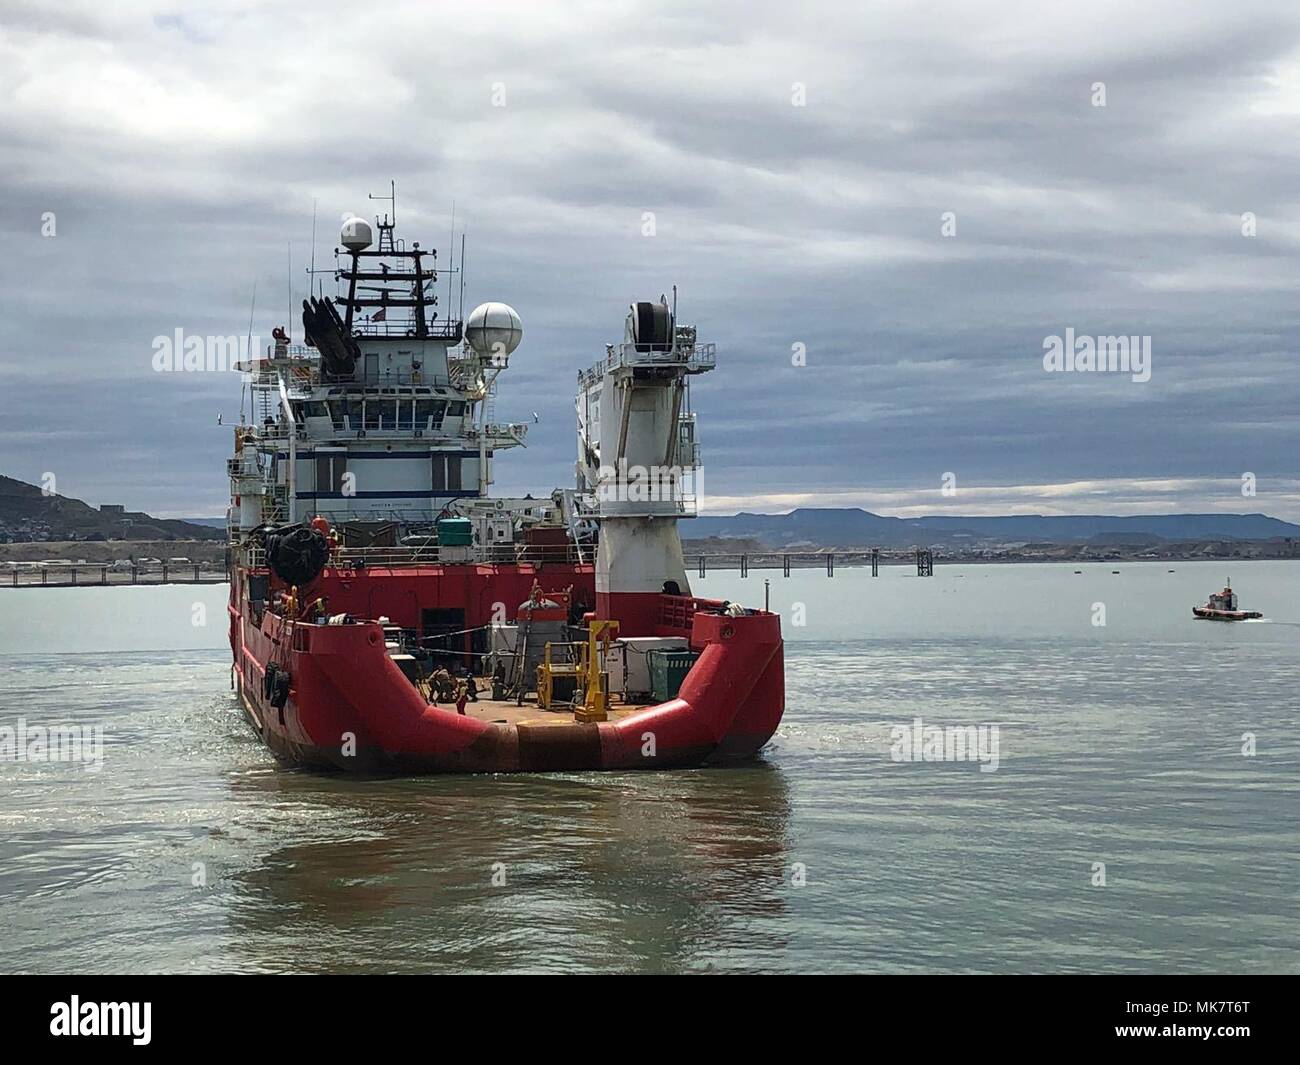 171121-N-TY130-016 COMODORO RIVADAVIA, Argentina (Nov. 20, 2017) The Norwegian construction support vessel Skandi Patagonia gets underway Argentine officials and Undersea Rescue Command (URC) Sailors equipment heading for the search area